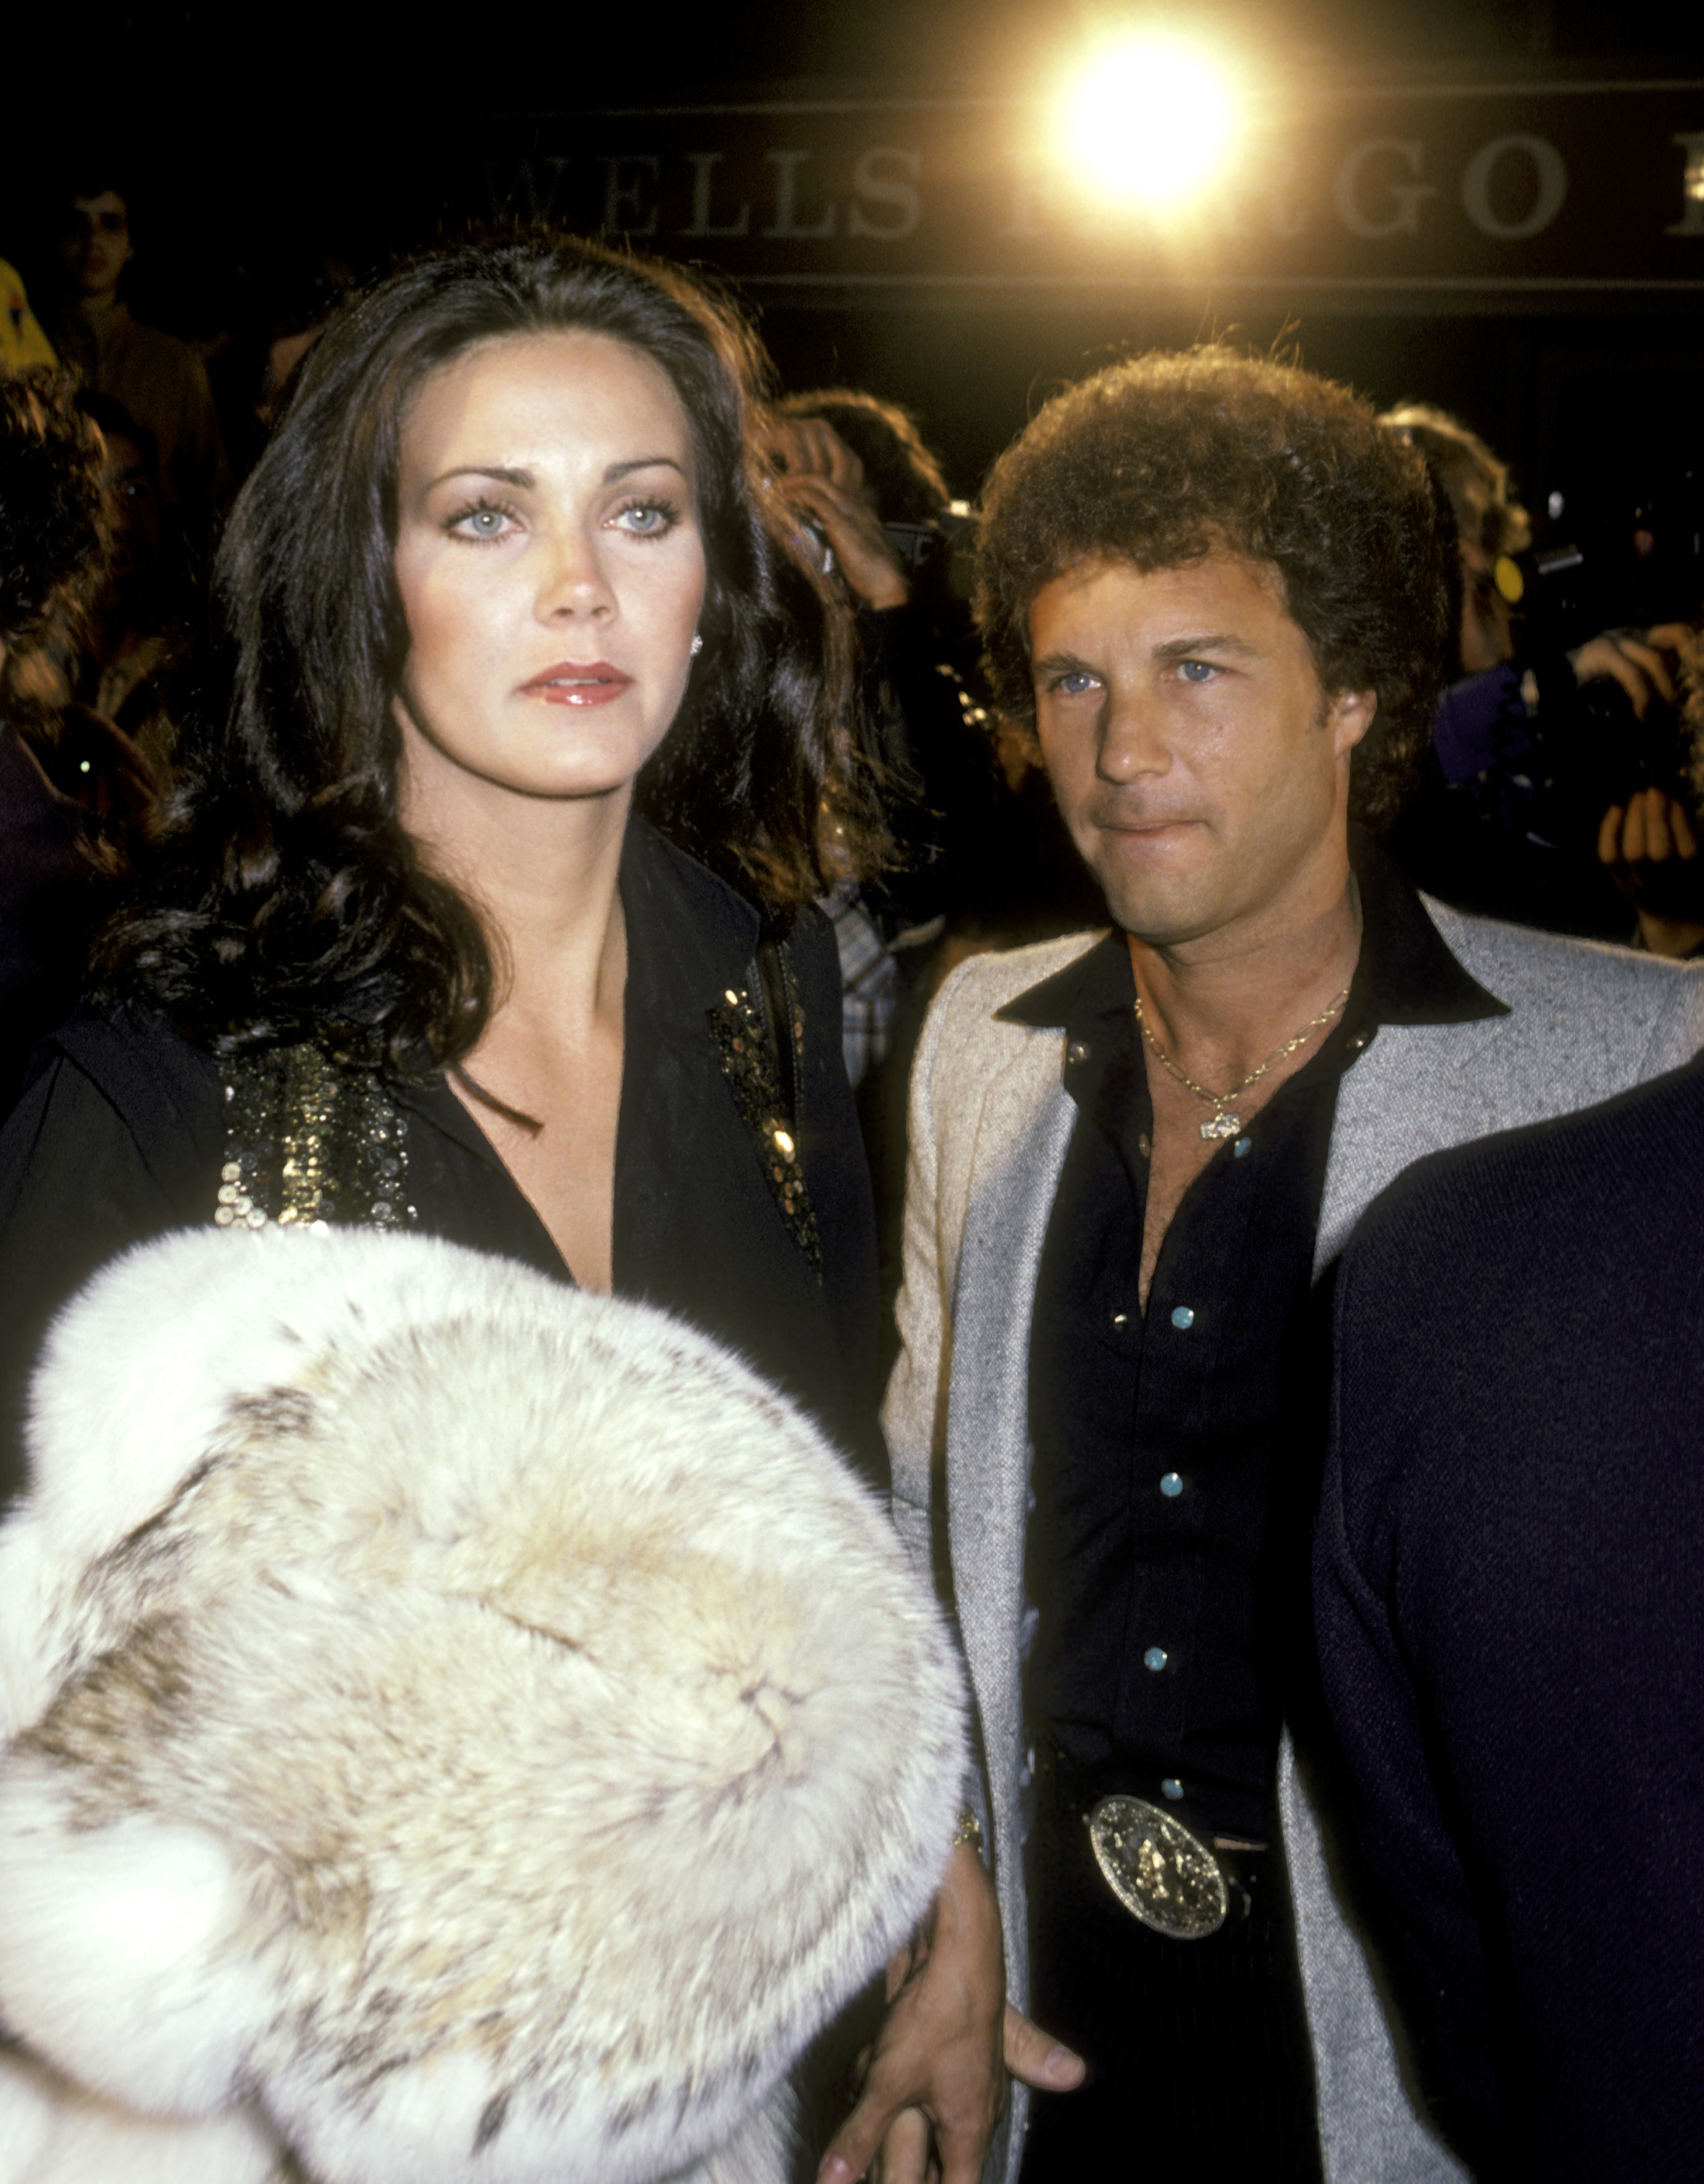 Lynda Carter and Ron Samuels at the premiere of "Nijinsky" in Beverly Hills, California in 1980. | Source: Getty Images